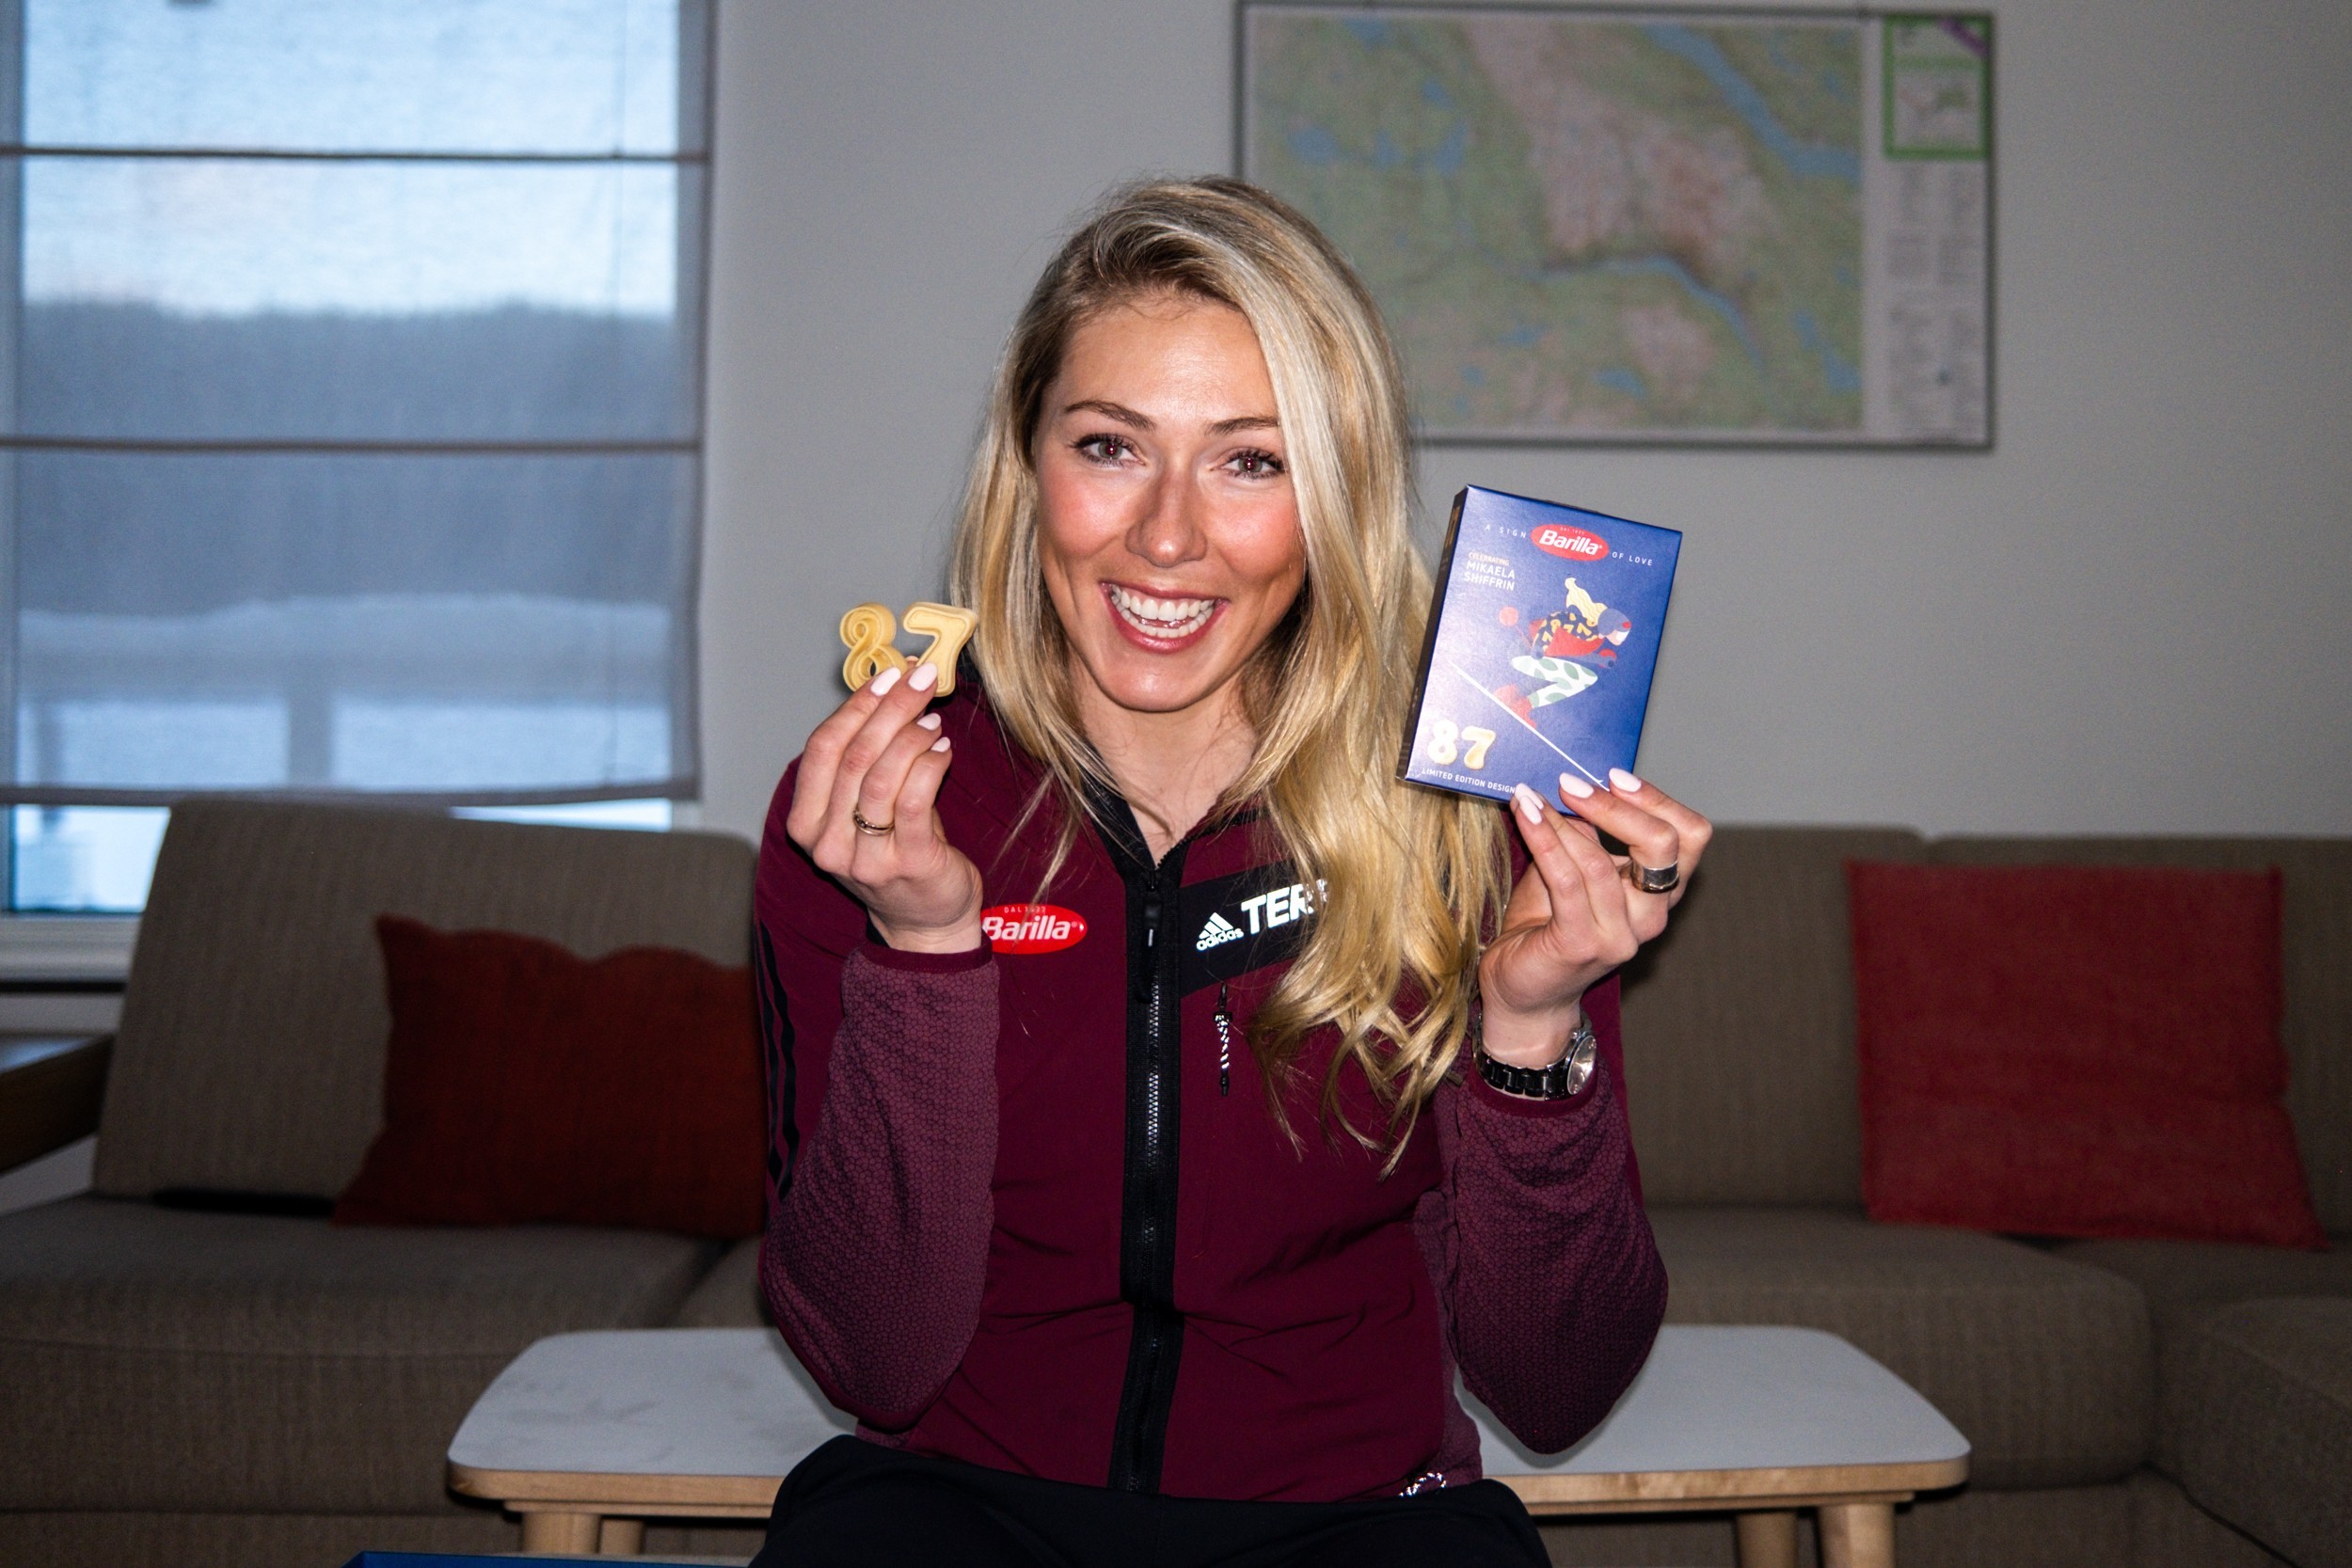 Barilla & Mikaela Shiffrin: Greatness starts with a great recipe - Pack No. 5   